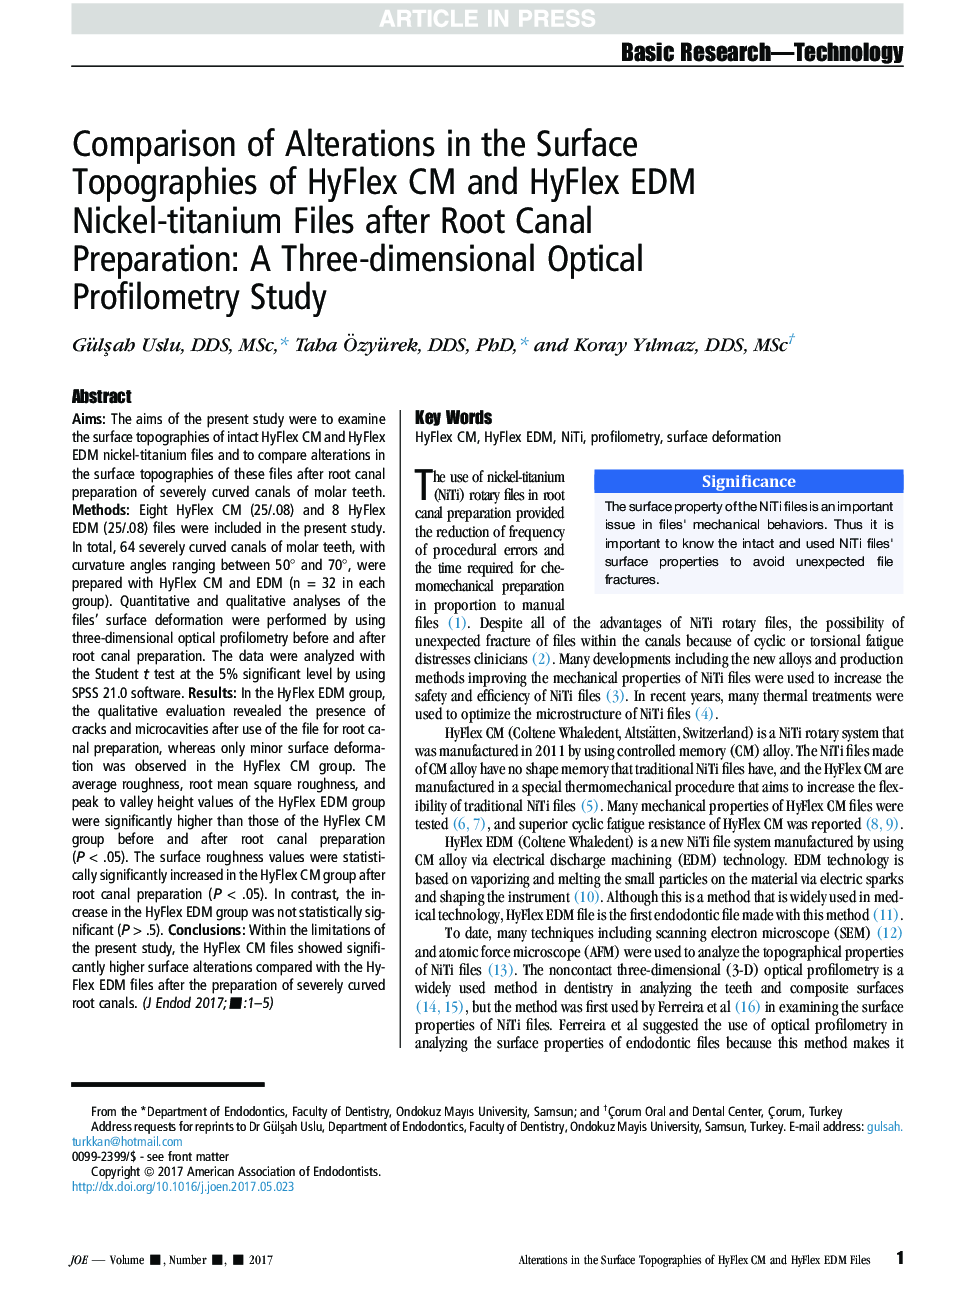 Comparison of Alterations in the Surface Topographies of HyFlex CM and HyFlex EDM Nickel-titanium Files after Root Canal Preparation: A Three-dimensional Optical Profilometry Study